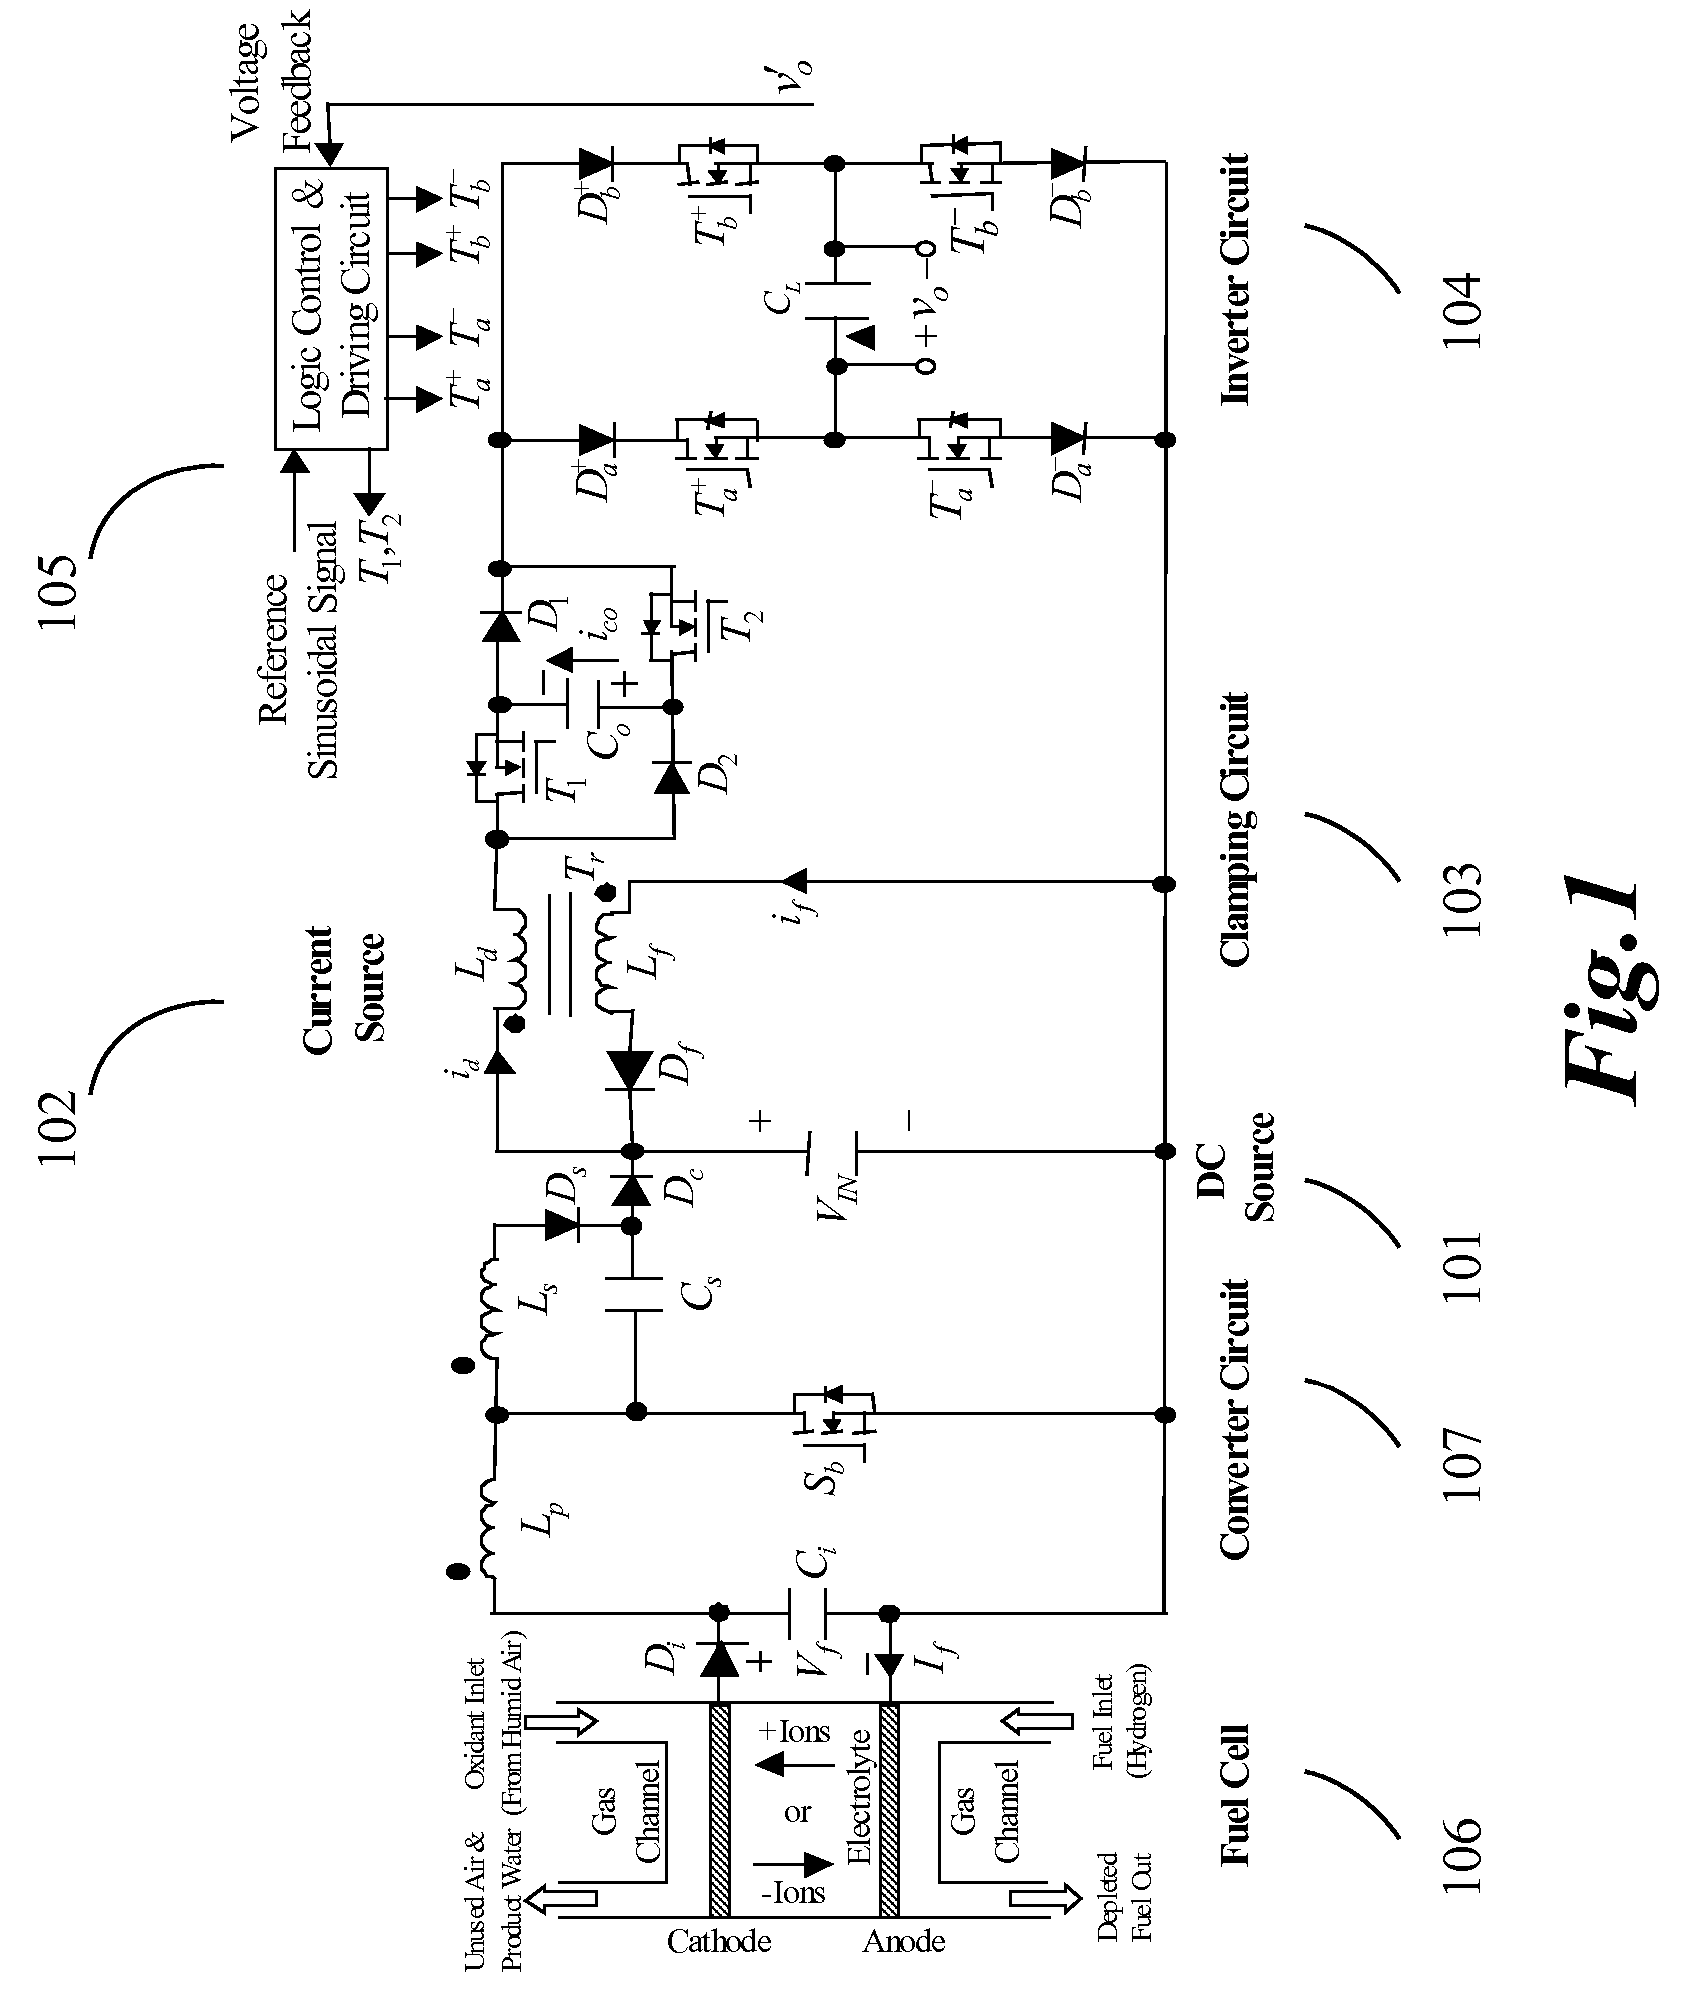 Current source wave voltage inverter voltage-clamping and soft-switching techniques, and fuel cell system using the same